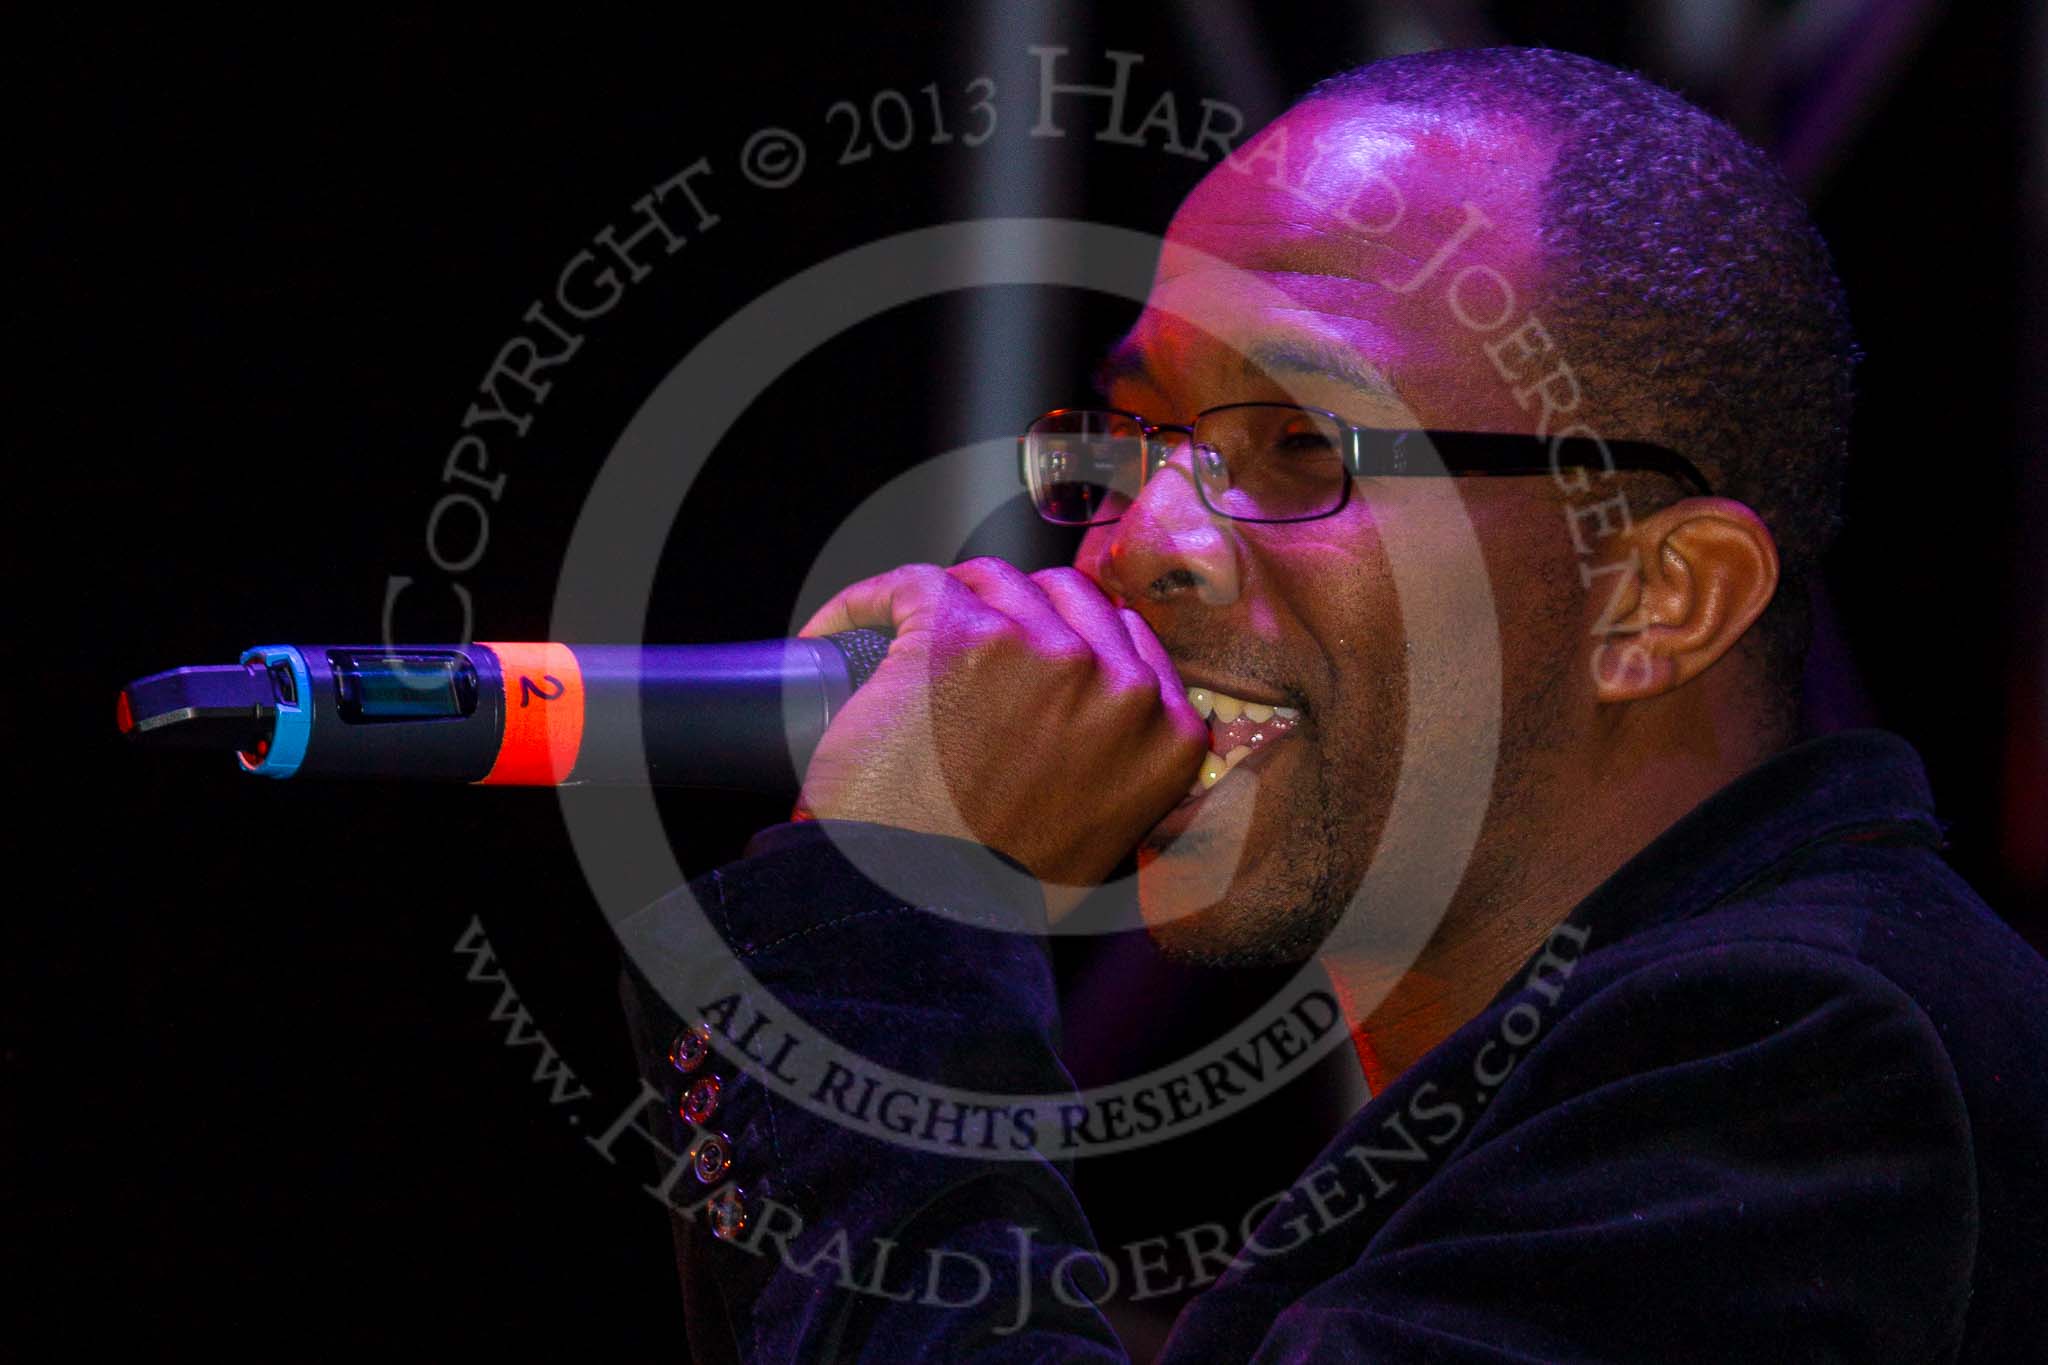 Grand Opening of the DBPC IXL Event Centre: Kym Mazelle & the Urban Blues Band - Abe Hampton (keyboards) introducing the band..
Dallas Burston Polo Club, Stoneythorpe Estate,
Southam,
Warwickshire,
United Kingdom,
on 05 December 2013 at 21:47, image #198